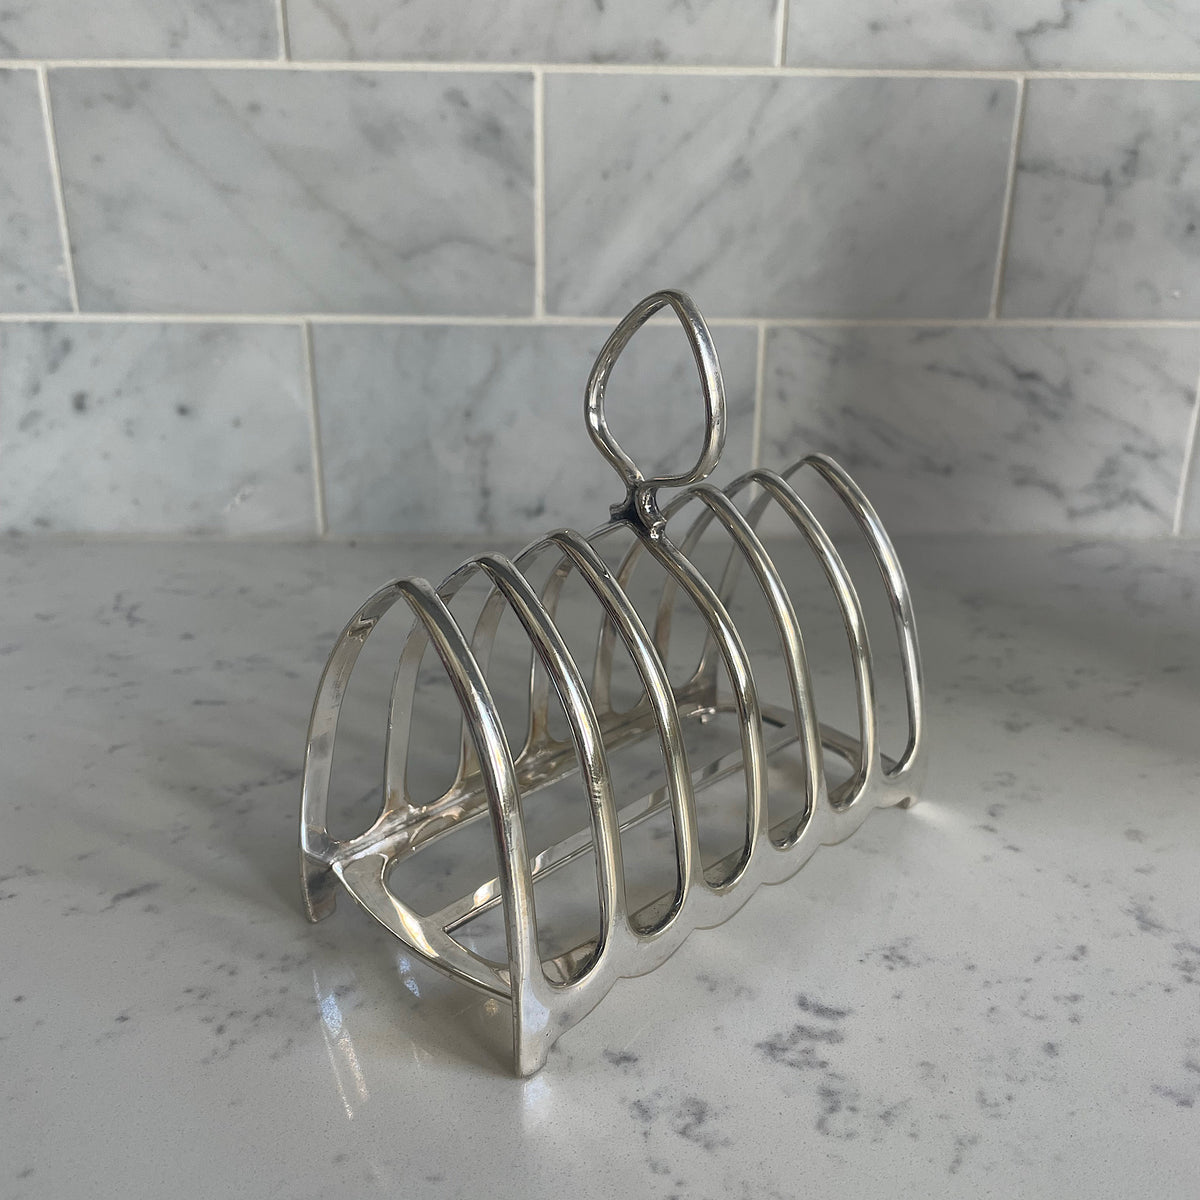 Antique Silver Plate Toast Rack